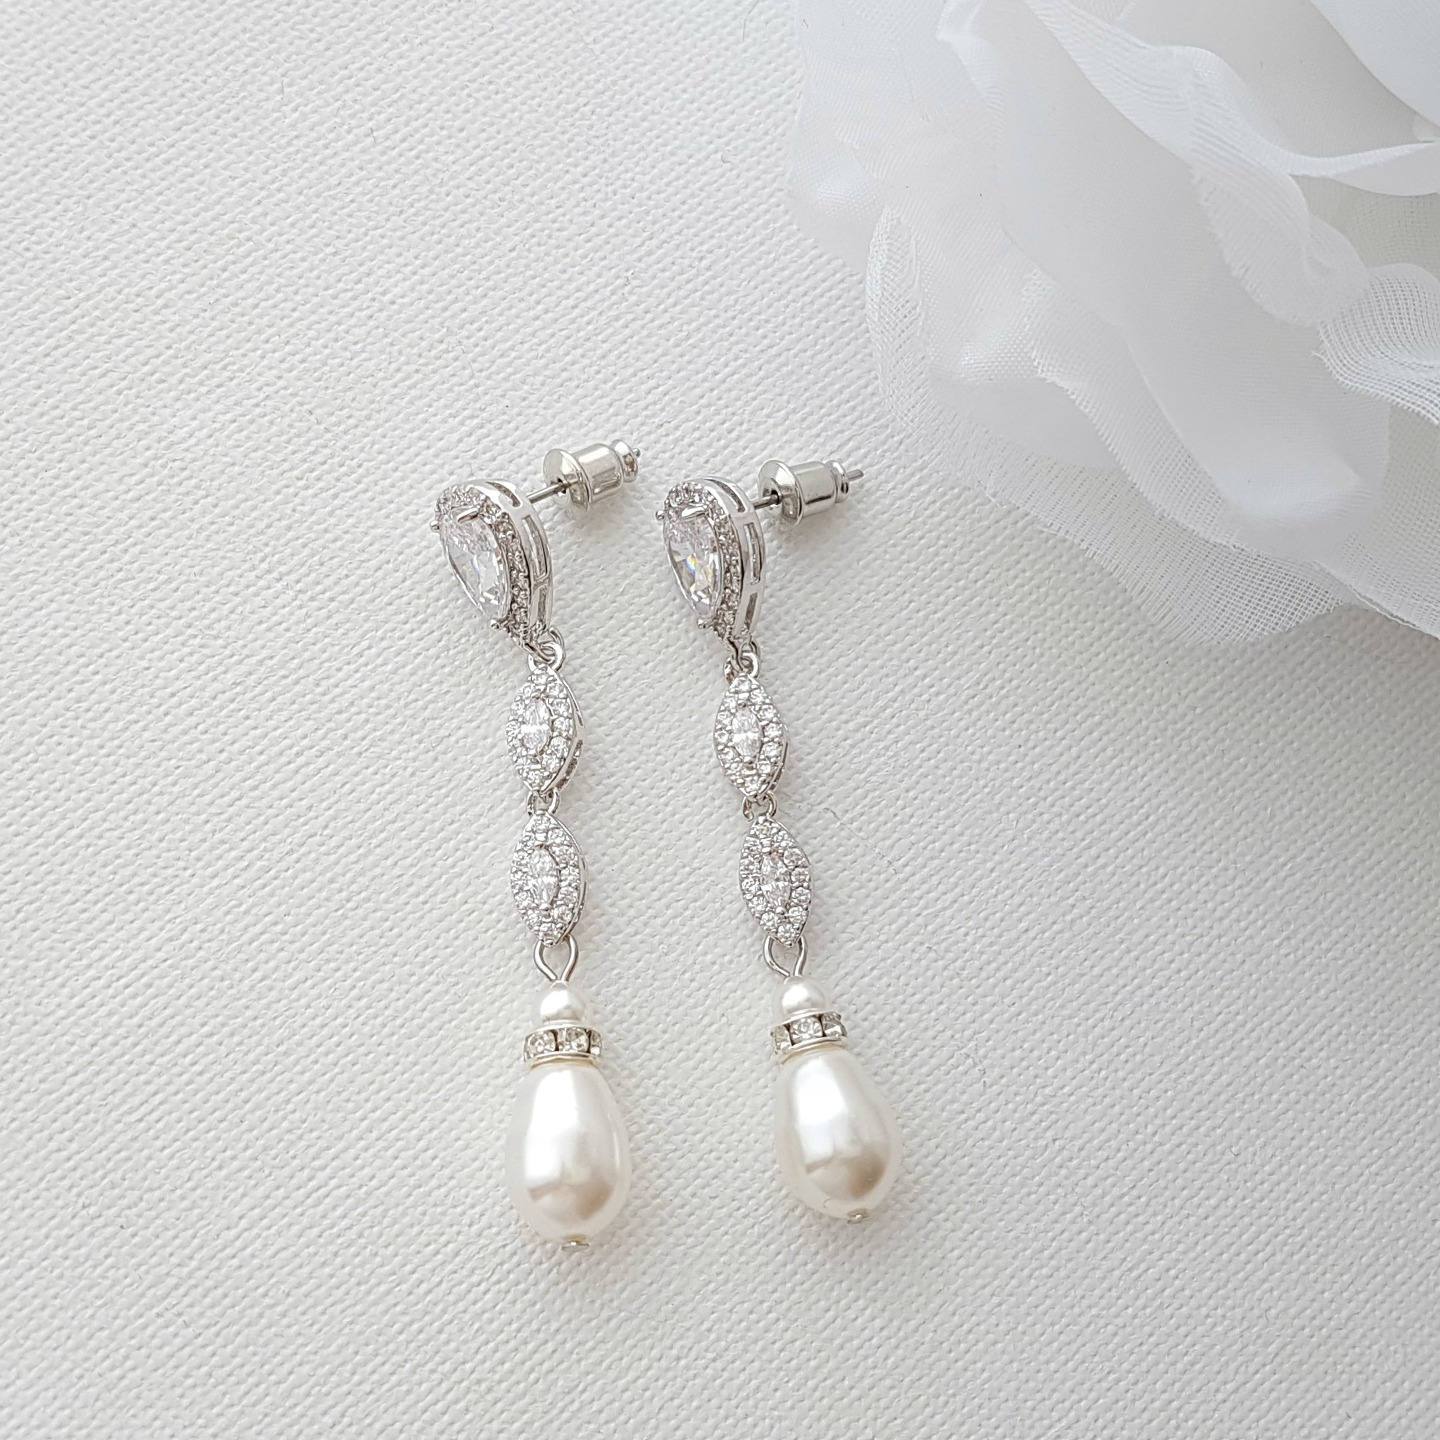 silver and pearl drop earrings bridal and formal Jewlery